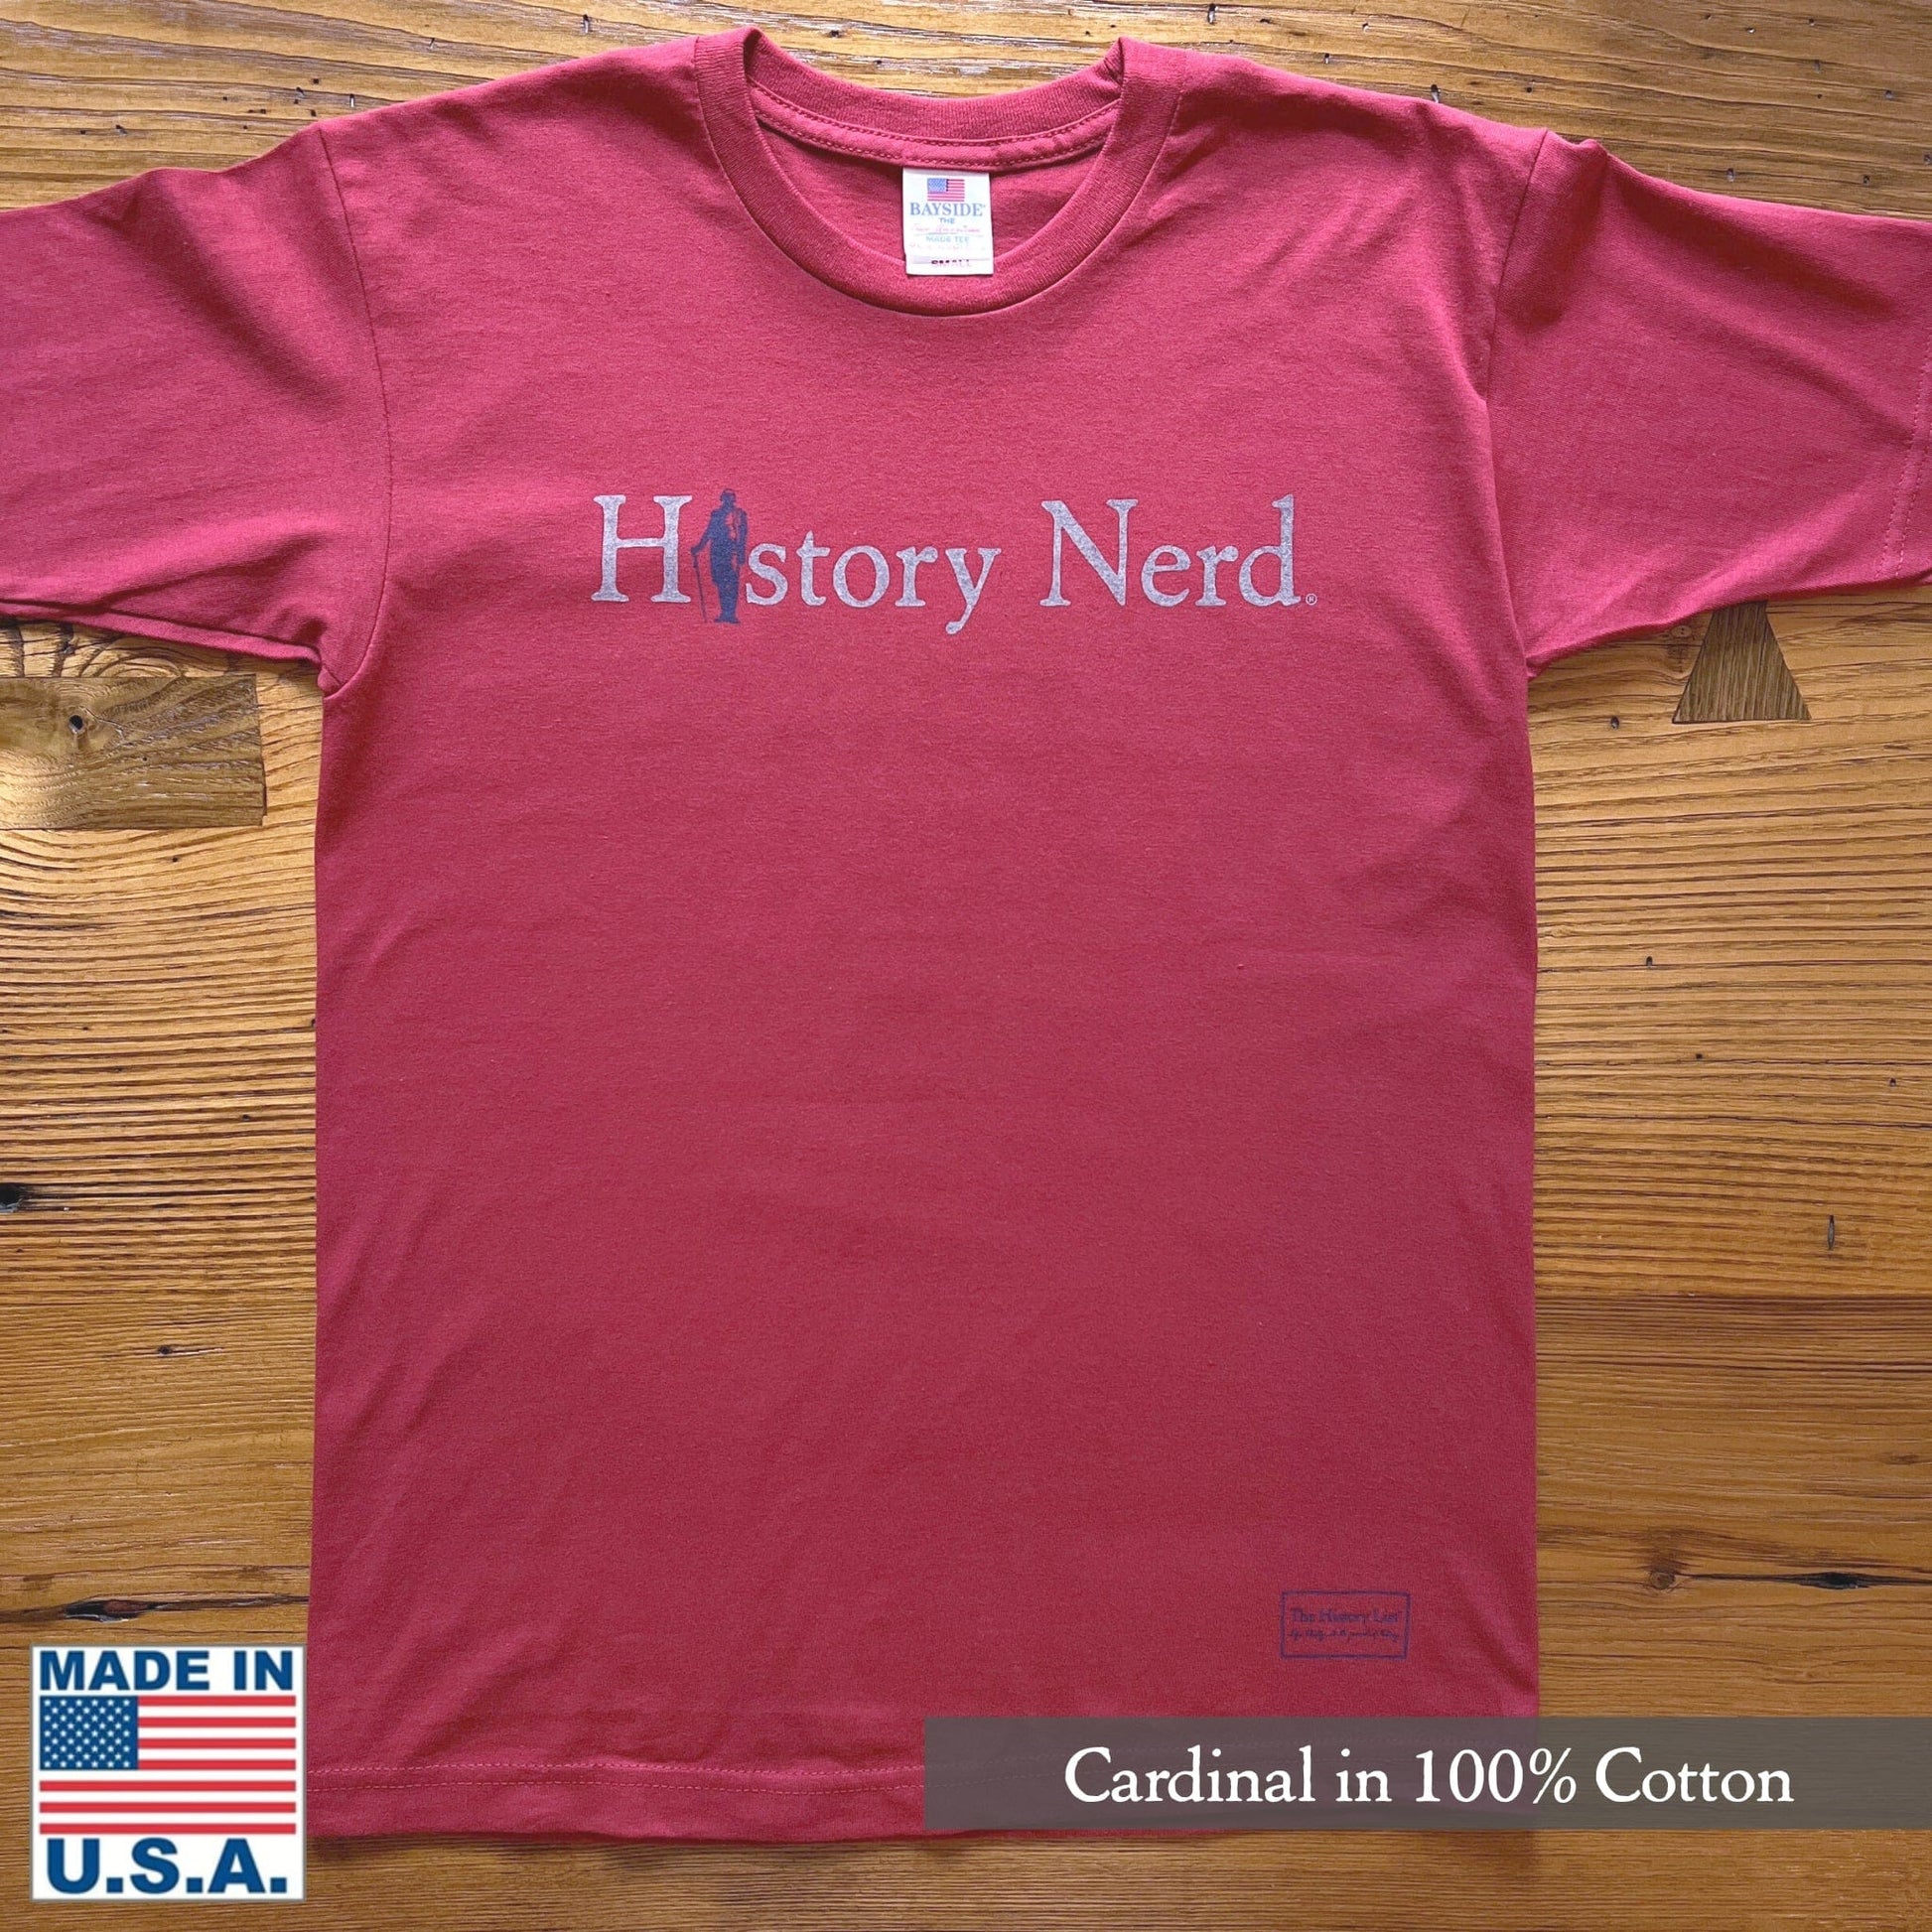 "History Nerd" shirt with George Washington — Made in the USA from the History List Store